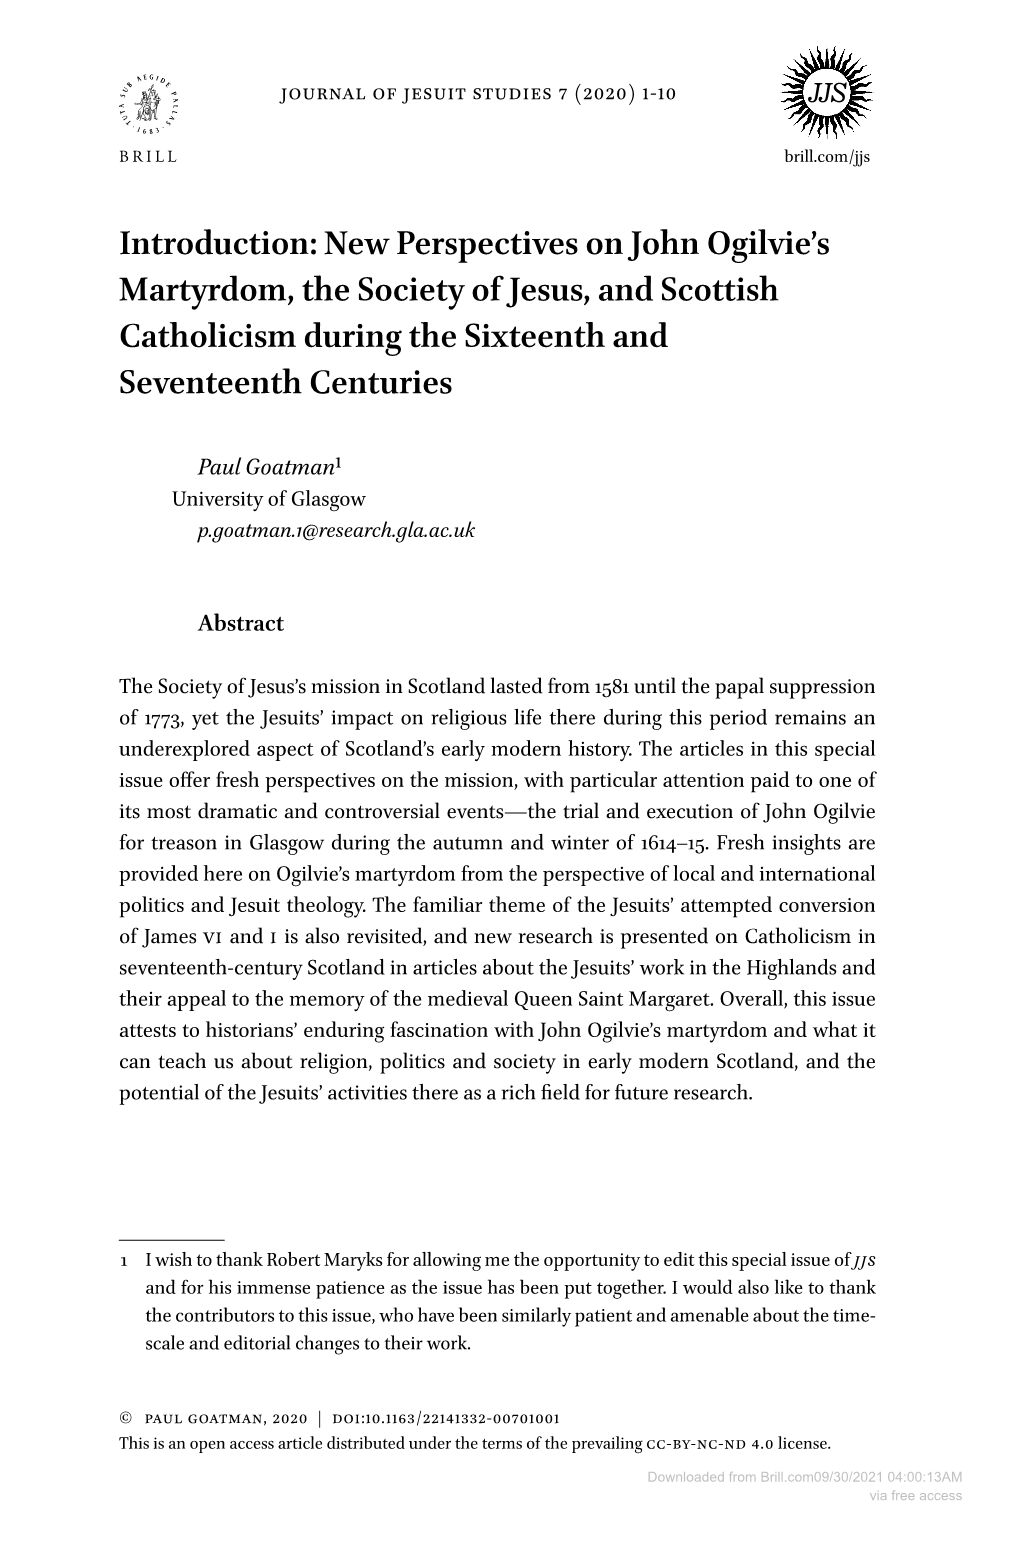 New Perspectives on John Ogilvie's Martyrdom, the Society Of